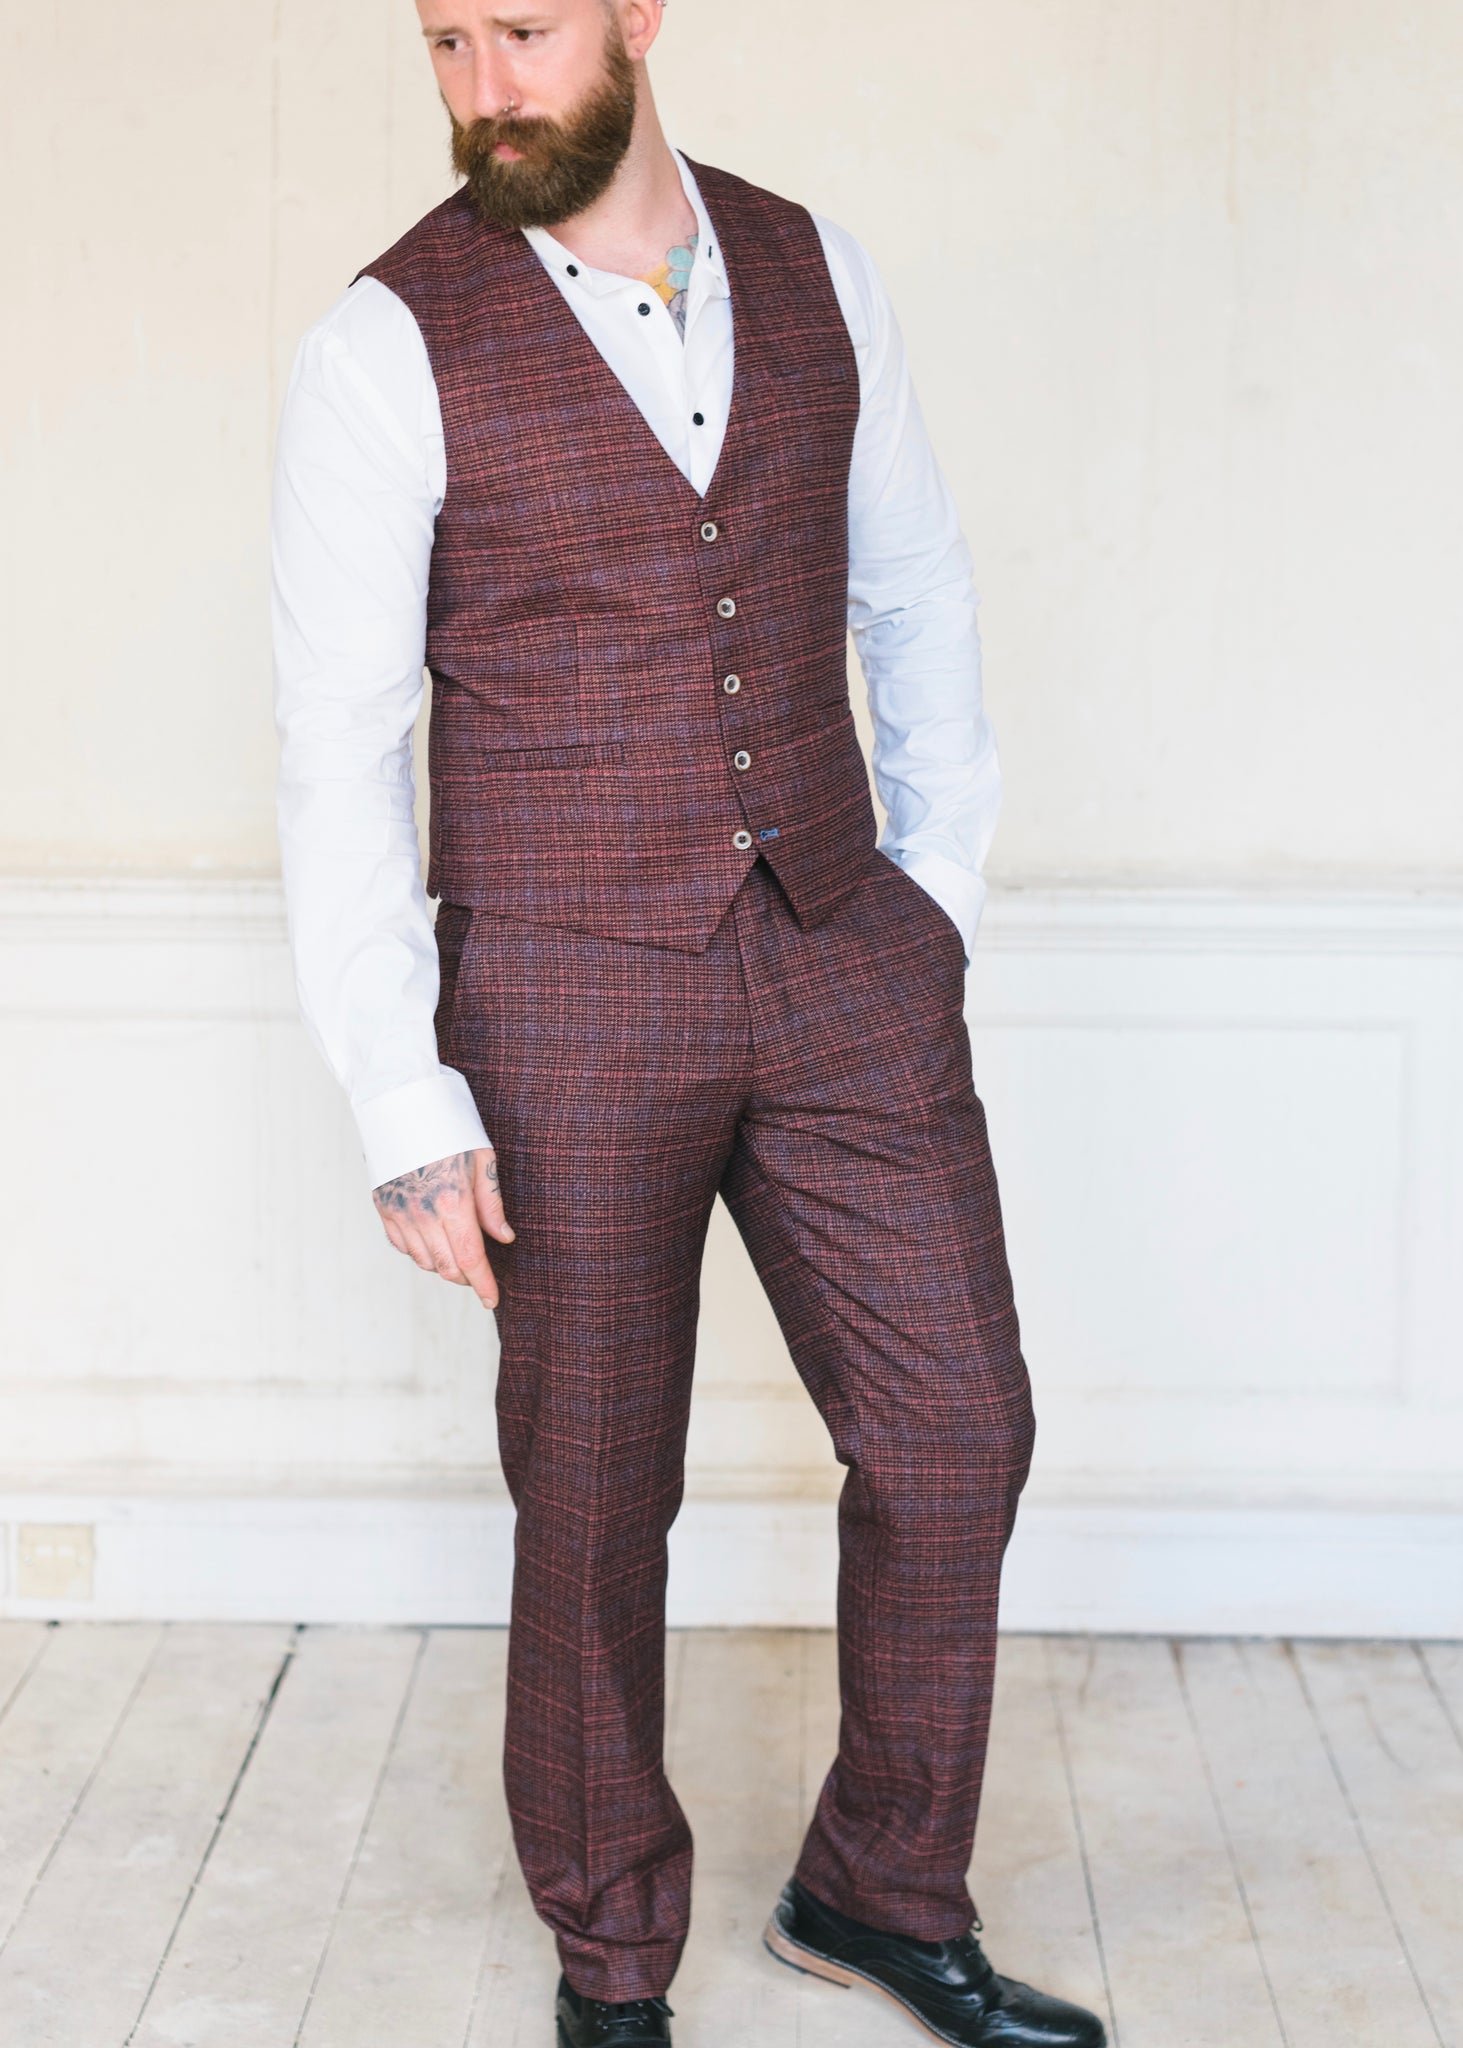 Marc Darcy Ted Tan Tweed Waistcoat  Suits from Hotspur 1364 Ltd UK